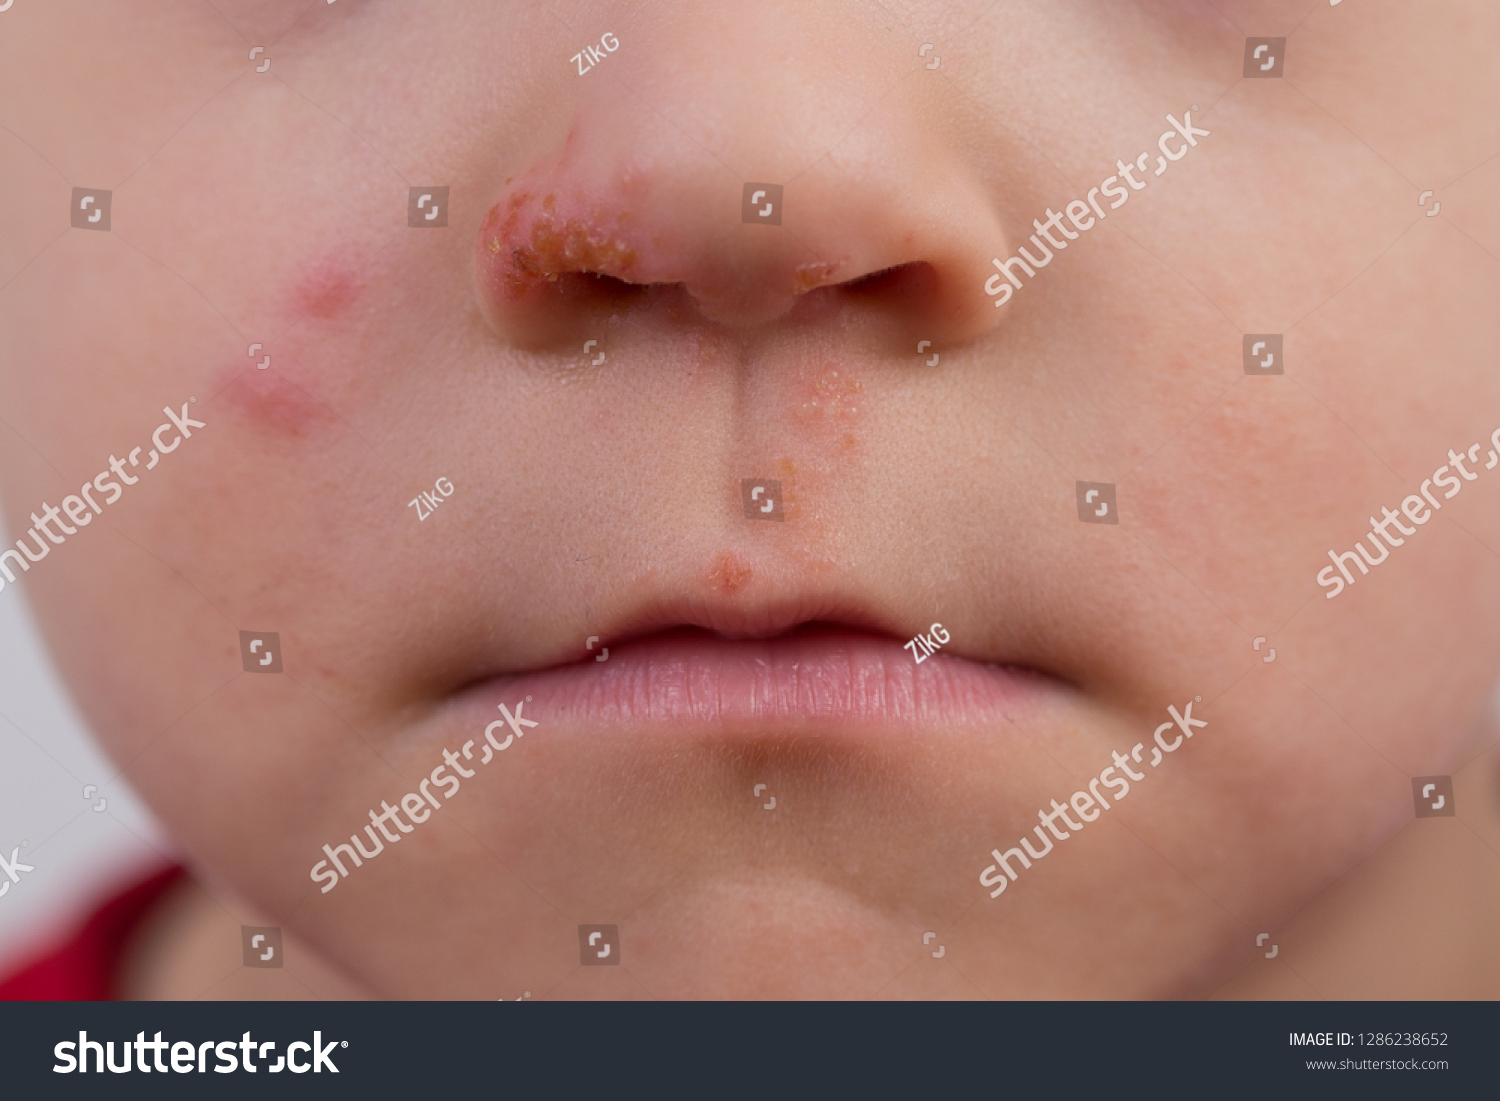 Close up of herpes breakout on boys face around nose and upper lip.  #1286238652